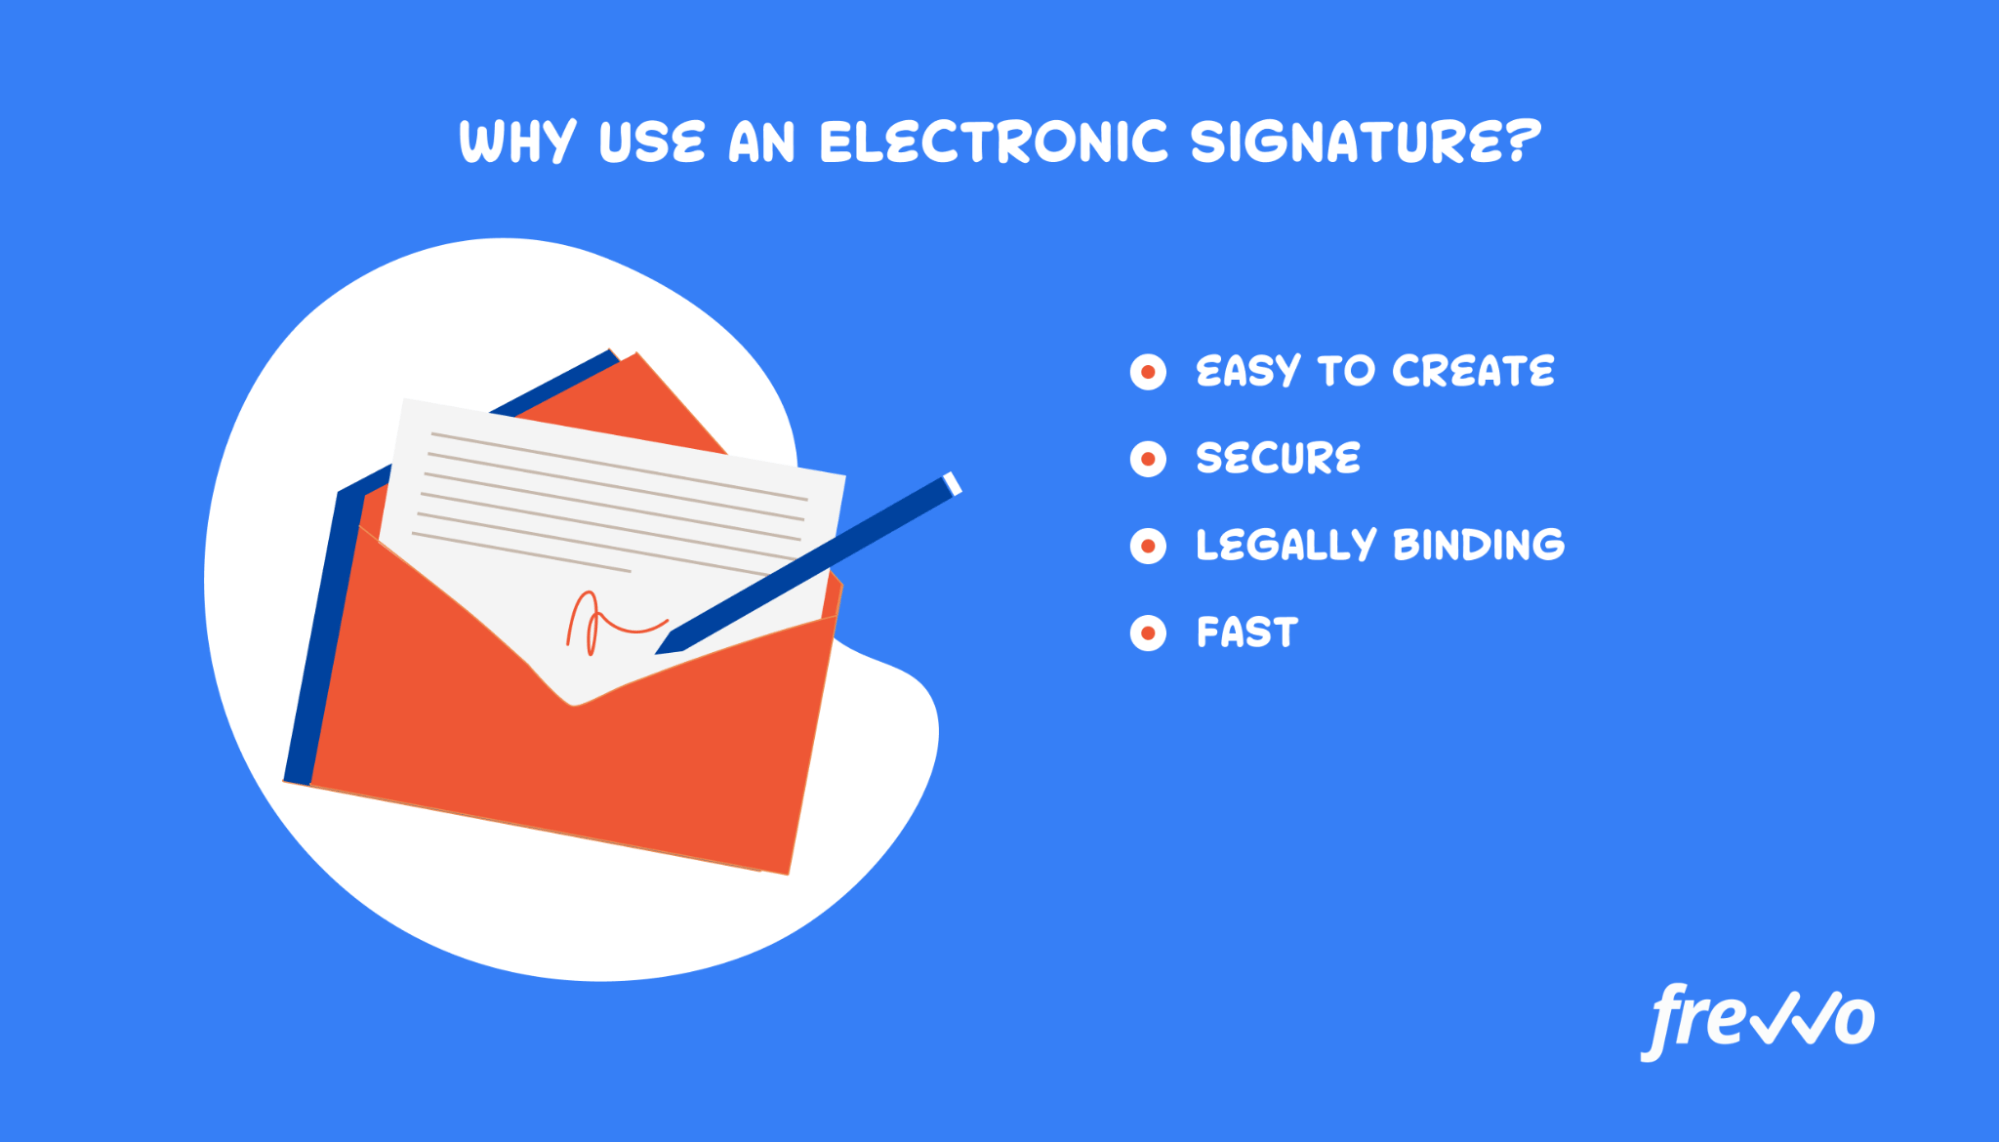 Four reasons to use an electronic signature